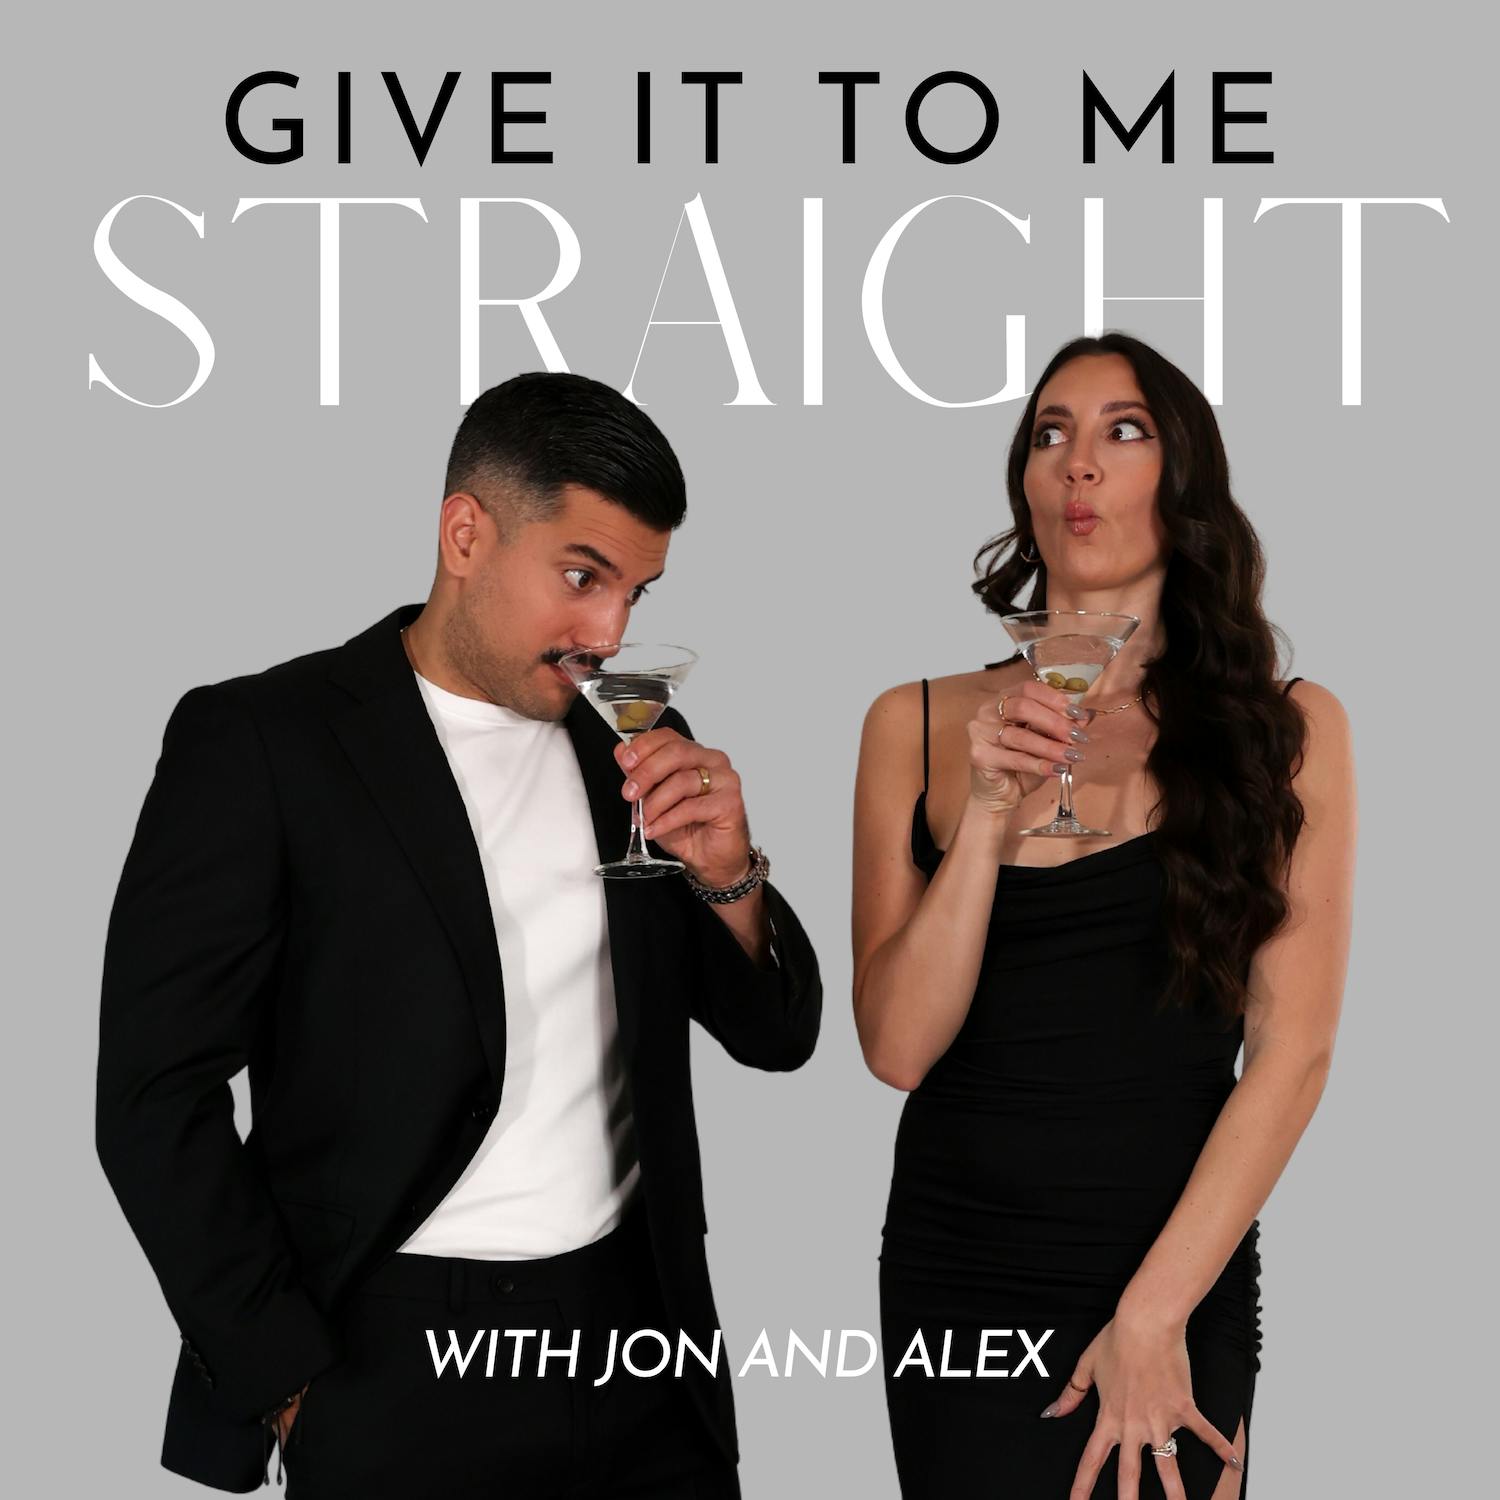 Reaching Your Goals In The New Year by Give It To Me Straight